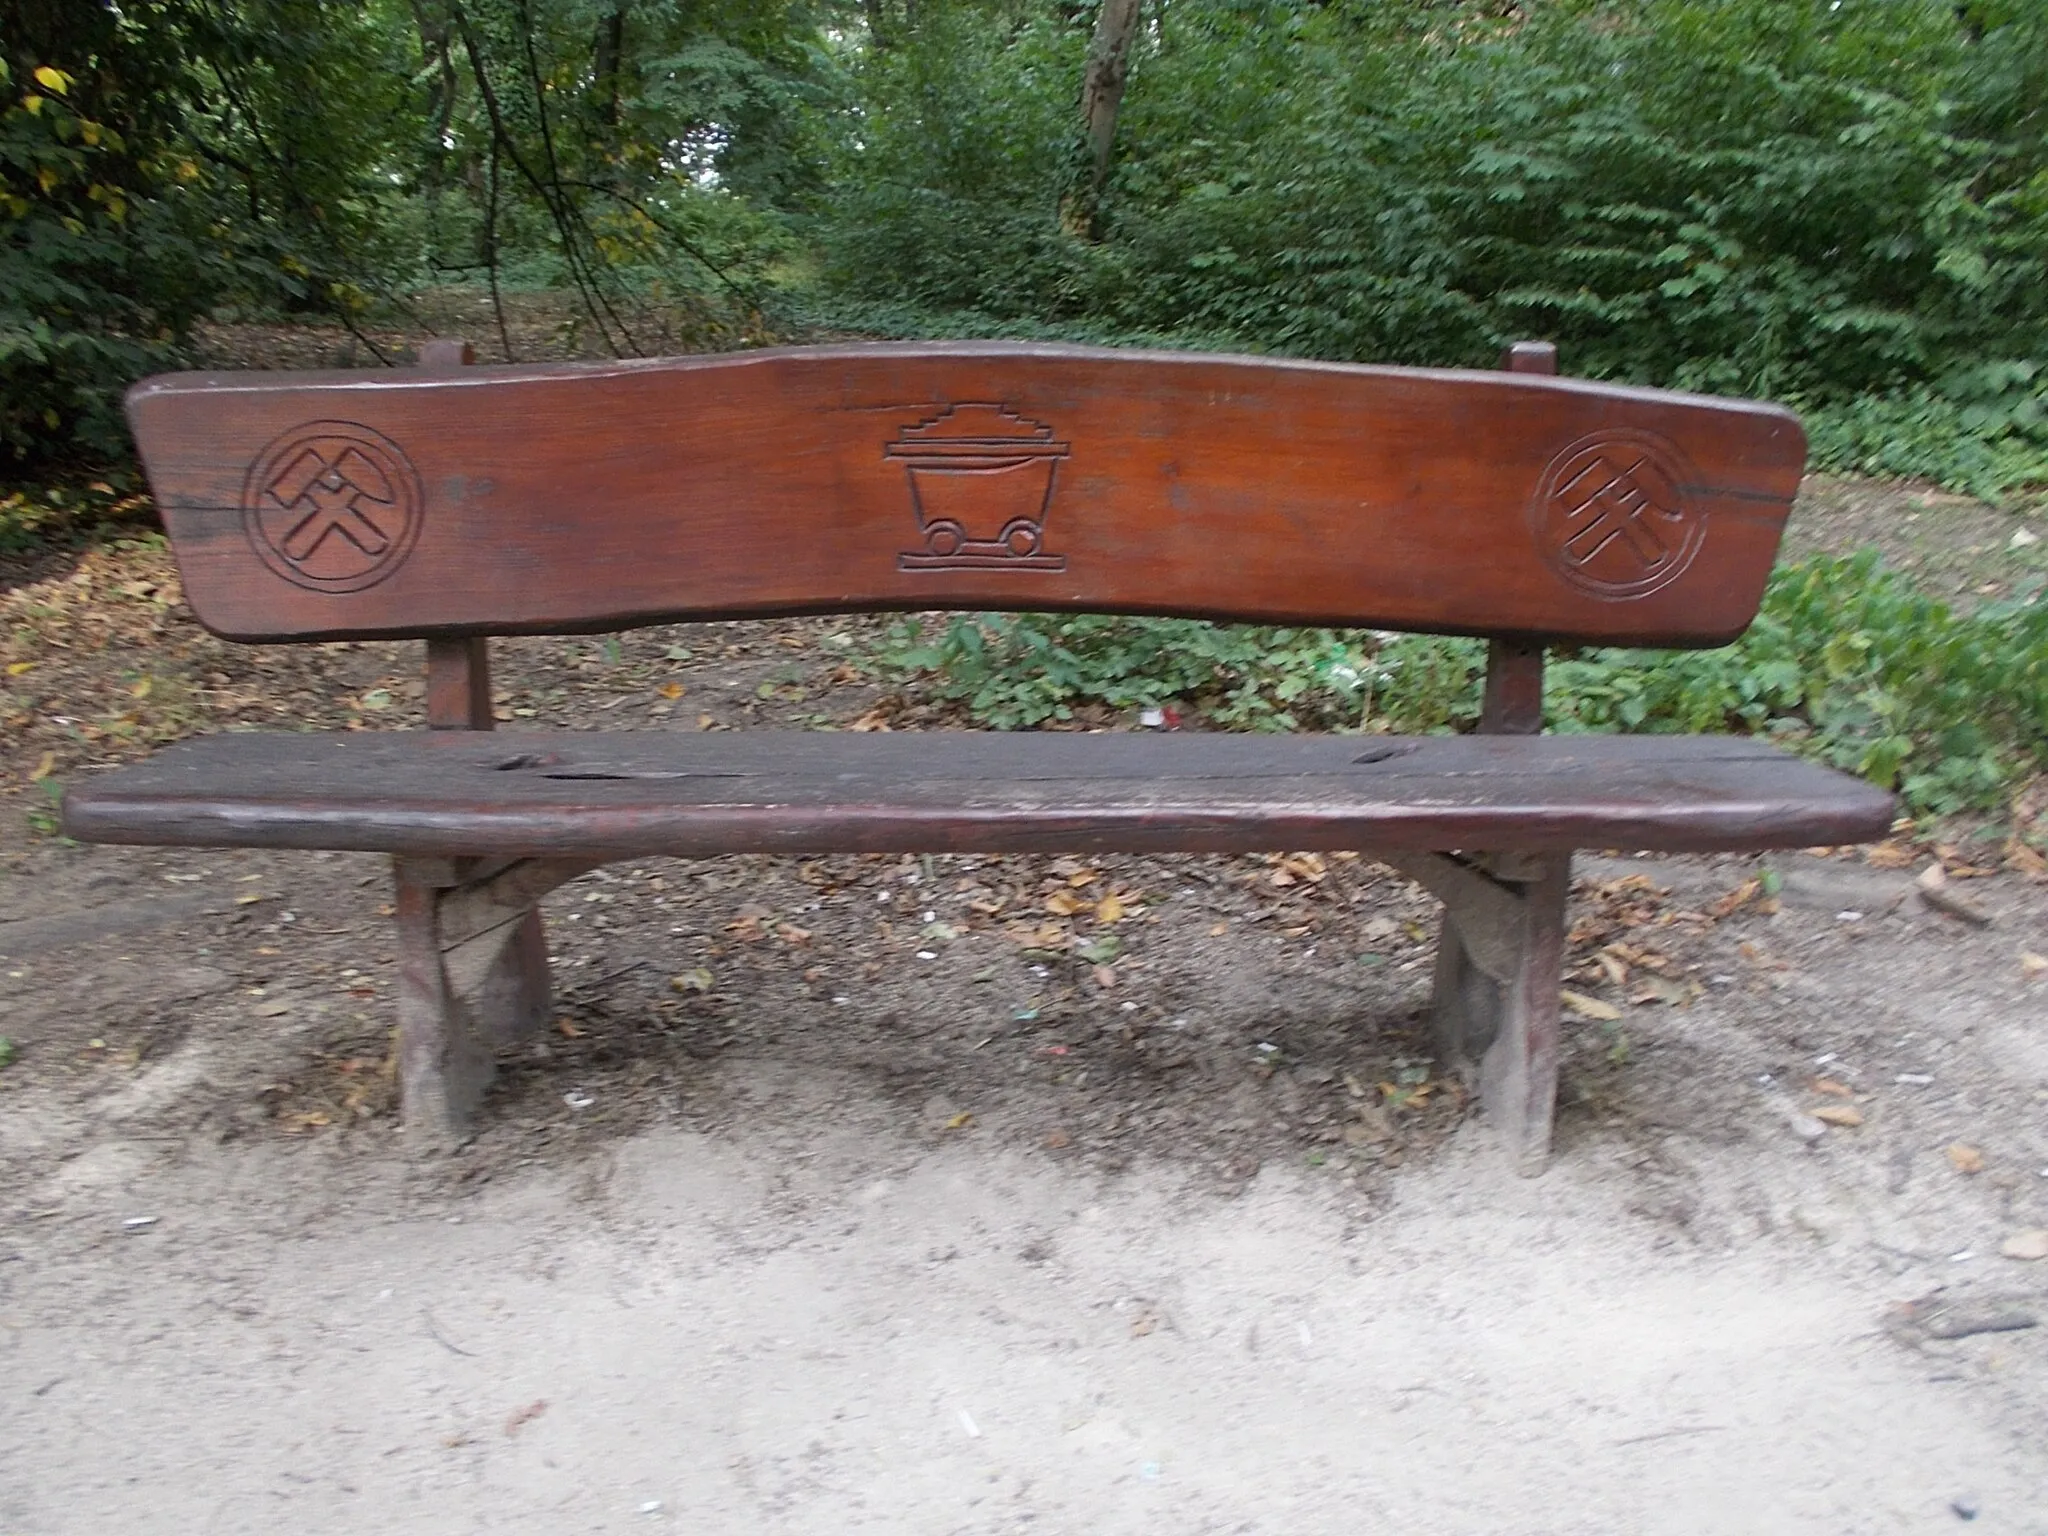 Photo showing: 'Mining cart' wooden bench /made in the local wood carving camp, c.2014-2015/. Next to its an information board about  "History of the Mining of Tatabánya  II 1901-1918" By about 1901, at the time of the construction of the railway station, the vertical transporters were already in operation, post office, telegraph, registry office comleted. By 1910 the eighth mine plant was completed, the steam-powered brick factory, and a briquette factory too. The Tatabánya  Sport Club, the mine rescue station was established. In 1912 a cement factory started to operate, the hospital was built, the old town church was built. In 1912 the MÁK Mining Co. was among the 50 largest companies in Europe partly due to the production of the Tata/Tatabánya coal basin. In 1914, the so-called railway coal pillar mining was started.  1915, due to the flood of the Galla-patk, the production of the Mine of Géza Teleki, No. 3, was stopped. 1917-1918 was a time of strikes. - About 'Mining cart' memorial bench information board: this is a four-wheeled small railway carriage in which the material produced in the mine is brought to the open air on narrow-track railways Towed by hand, with the help of a horse, with an infinity rope or locomotive. Cargo weight: 500-1400kg - Május 1. park, Óváros neighborhood, Tatabánya, Komárom-Esztergom County, Hungary.